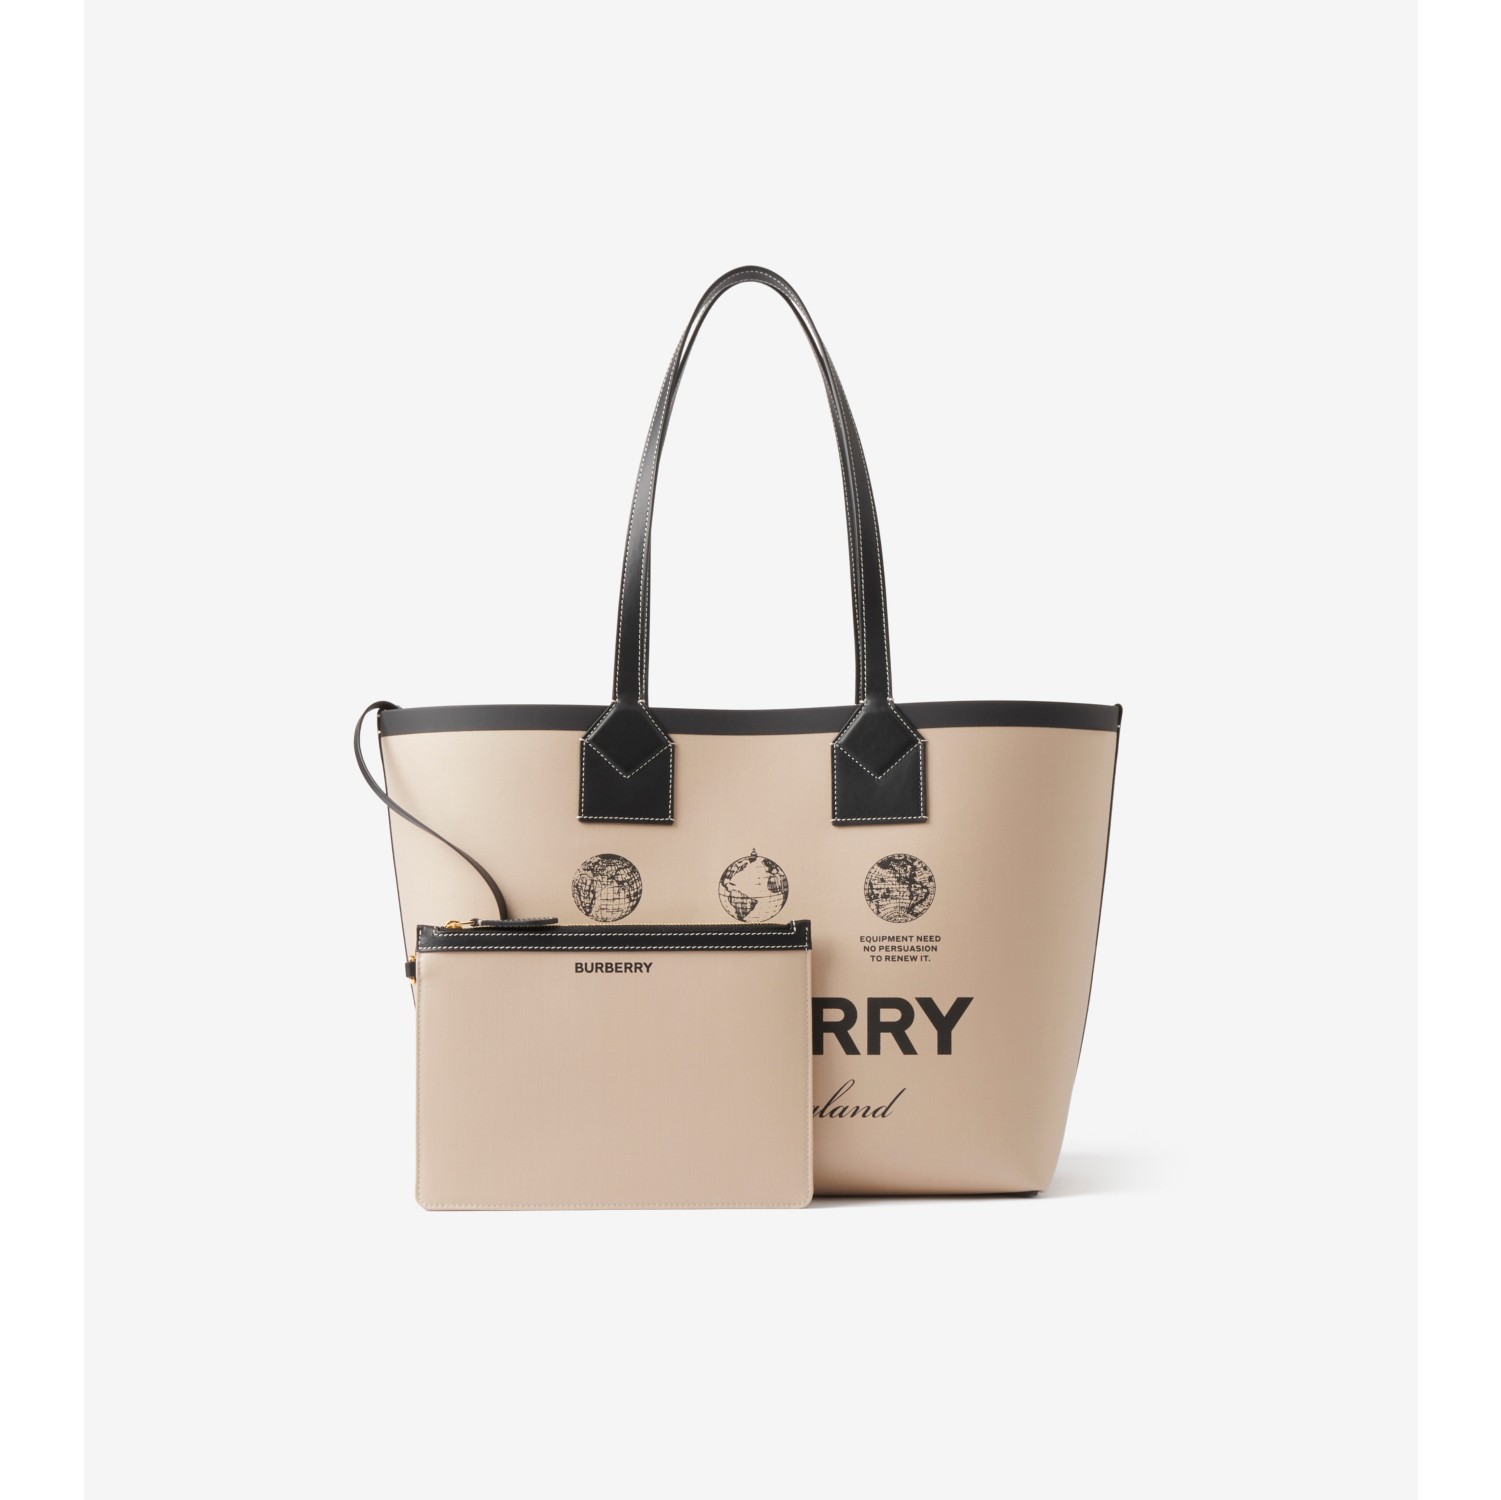 graphic logo Society tote bag, Burberry